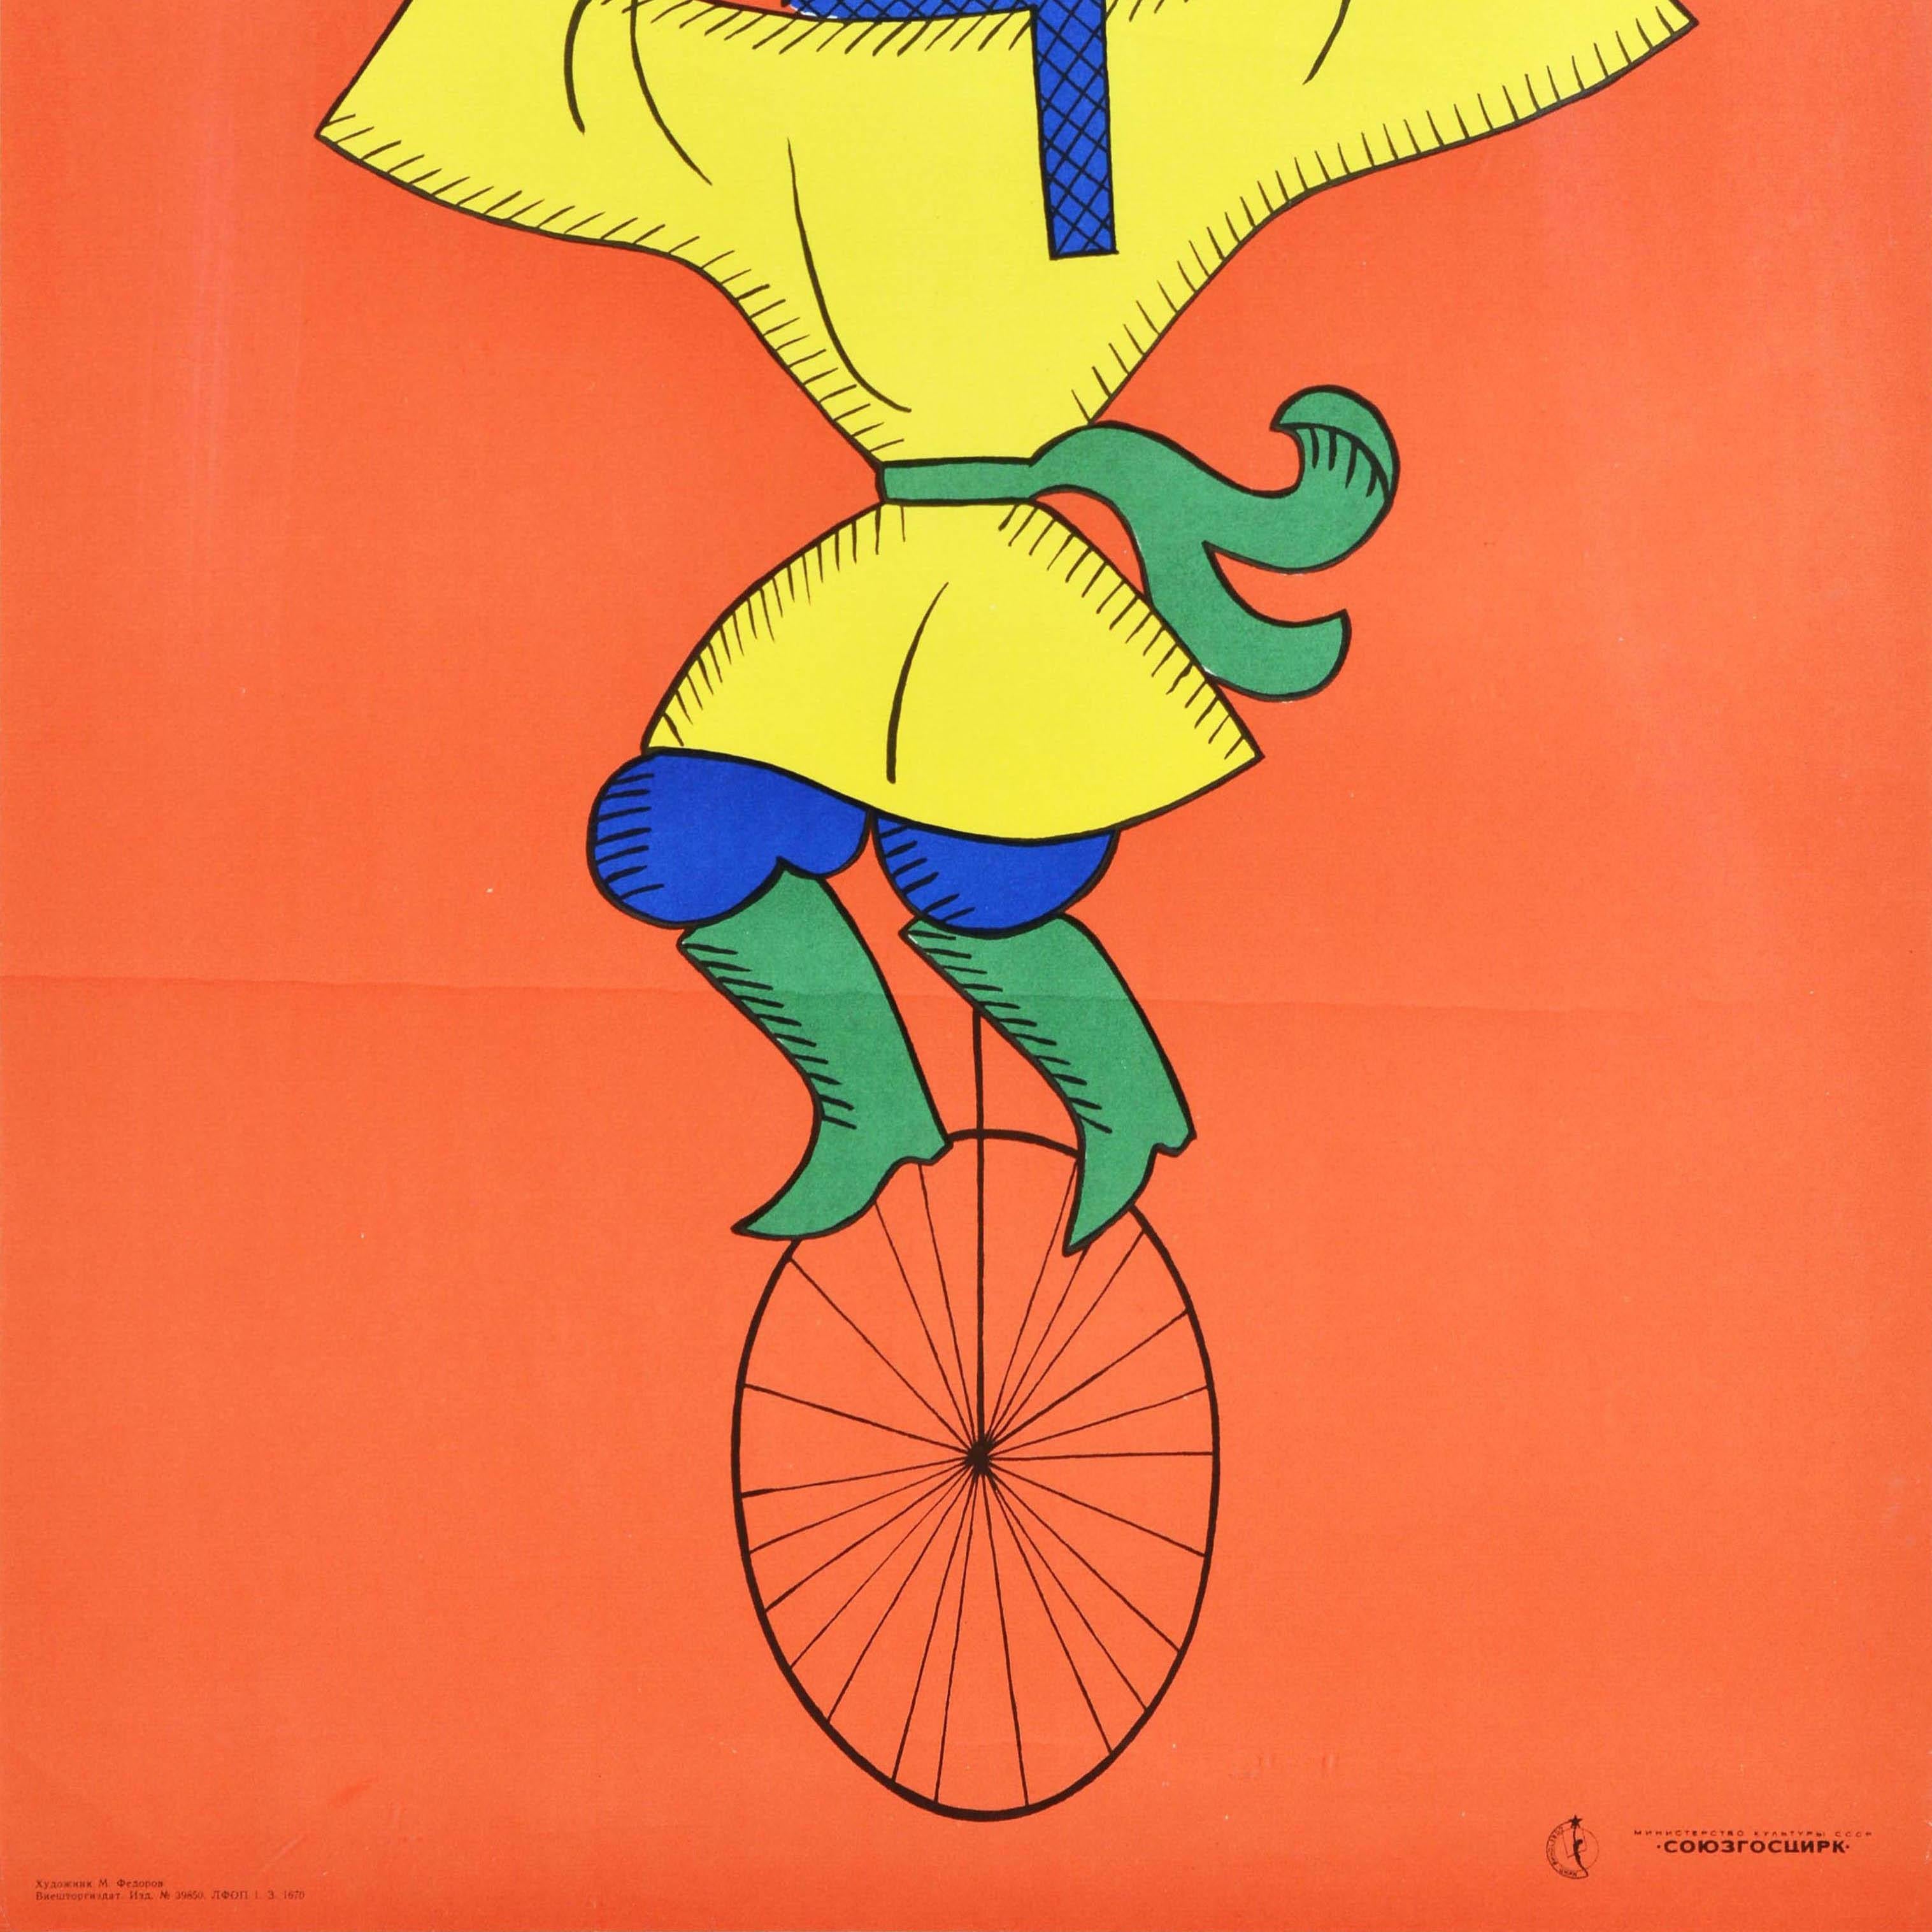 Original vintage Soviet advertising poster - Circus for Children / Цирк Детям - featuring a fun illustration of a bear in a traditional style yellow shirt and blue trousers with green boots riding a unicycle whilst playing a horn and holding a blue